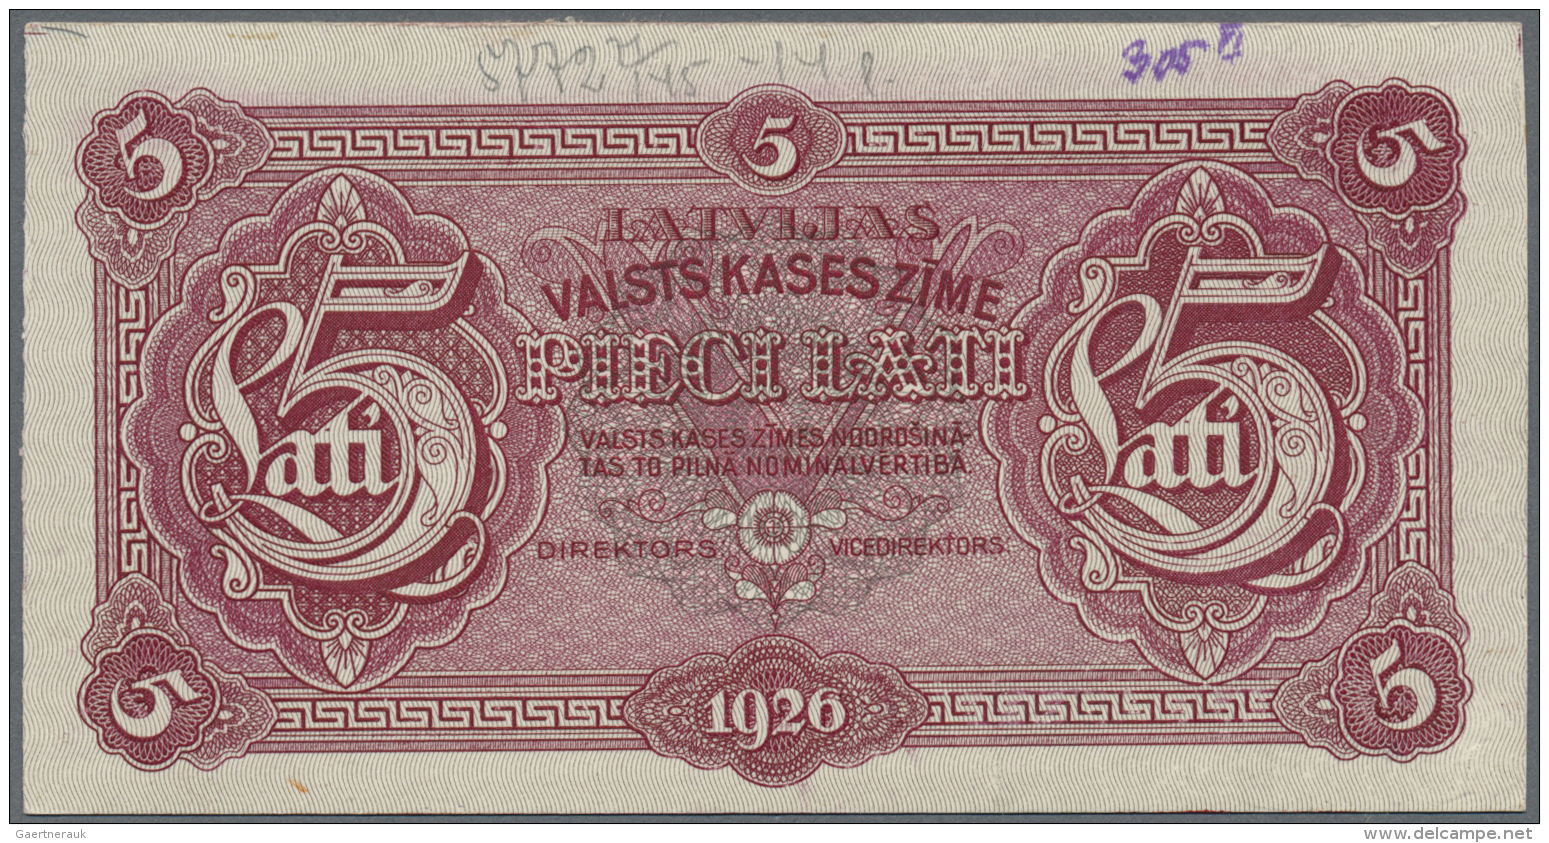 Latvia /Lettland: Very Rare 5 Lati 1926 Front Proof Uniface Print P. 23p, Without Serial #, W/o Sign, Printers Annotatio - Lettonie